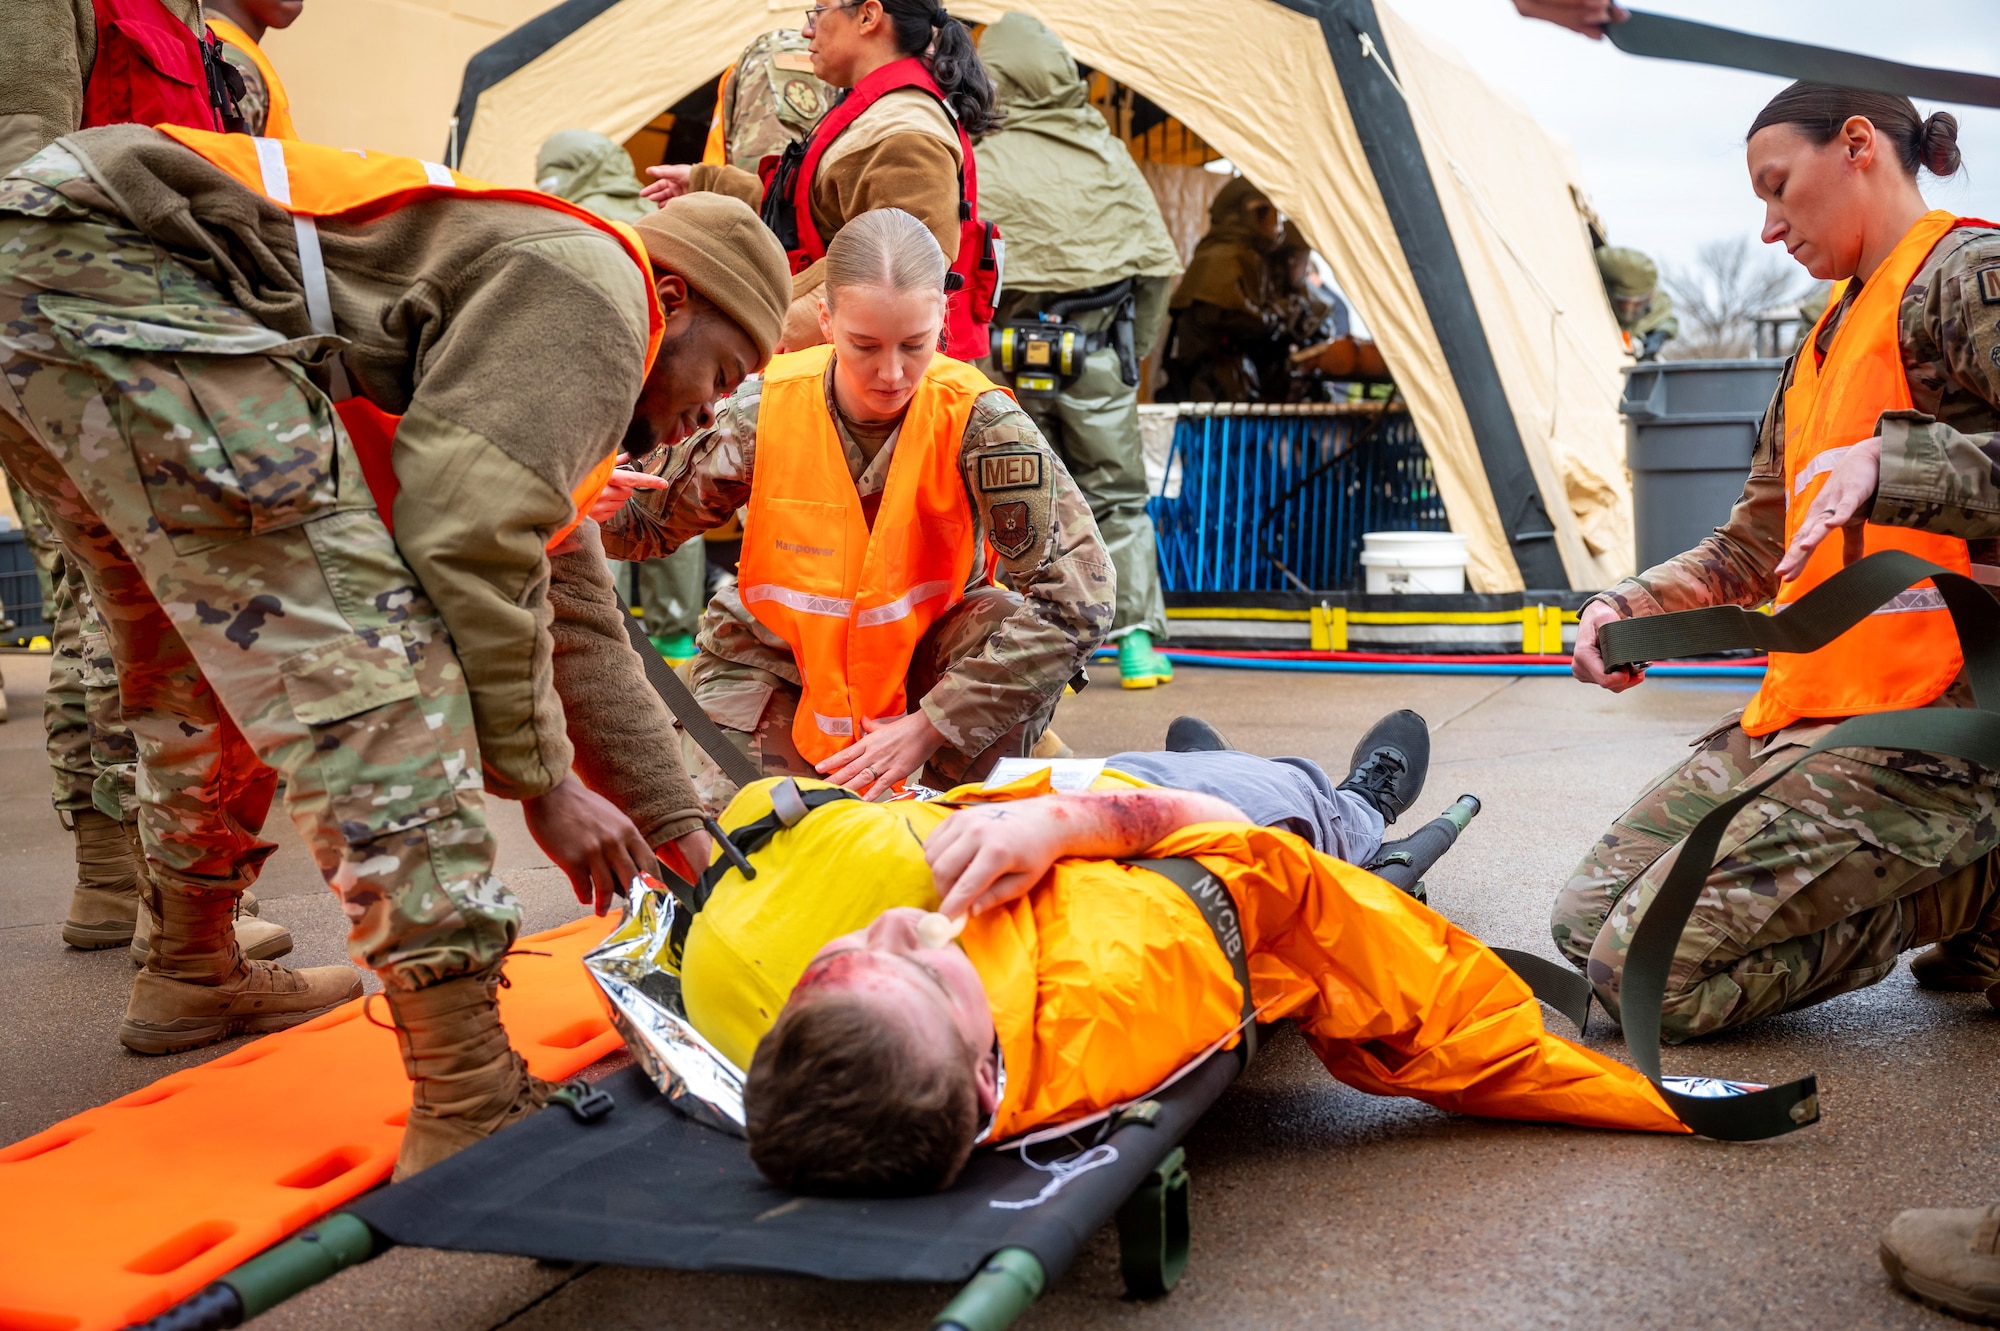 Airmen from the 7th Medical Group secure a simulated medical patient on a stretcher during the Ready Eagle II exercise capstone at Dyess Air Force Base, Texas, Jan. 25, 2024. Ready Eagle II was a 3-day medical training event to enhance the medical contingency response of the 7th MDG while testing and training multiple home station medical response teams. (U.S. Air Force photo by Senior Airman Leon Redfern)